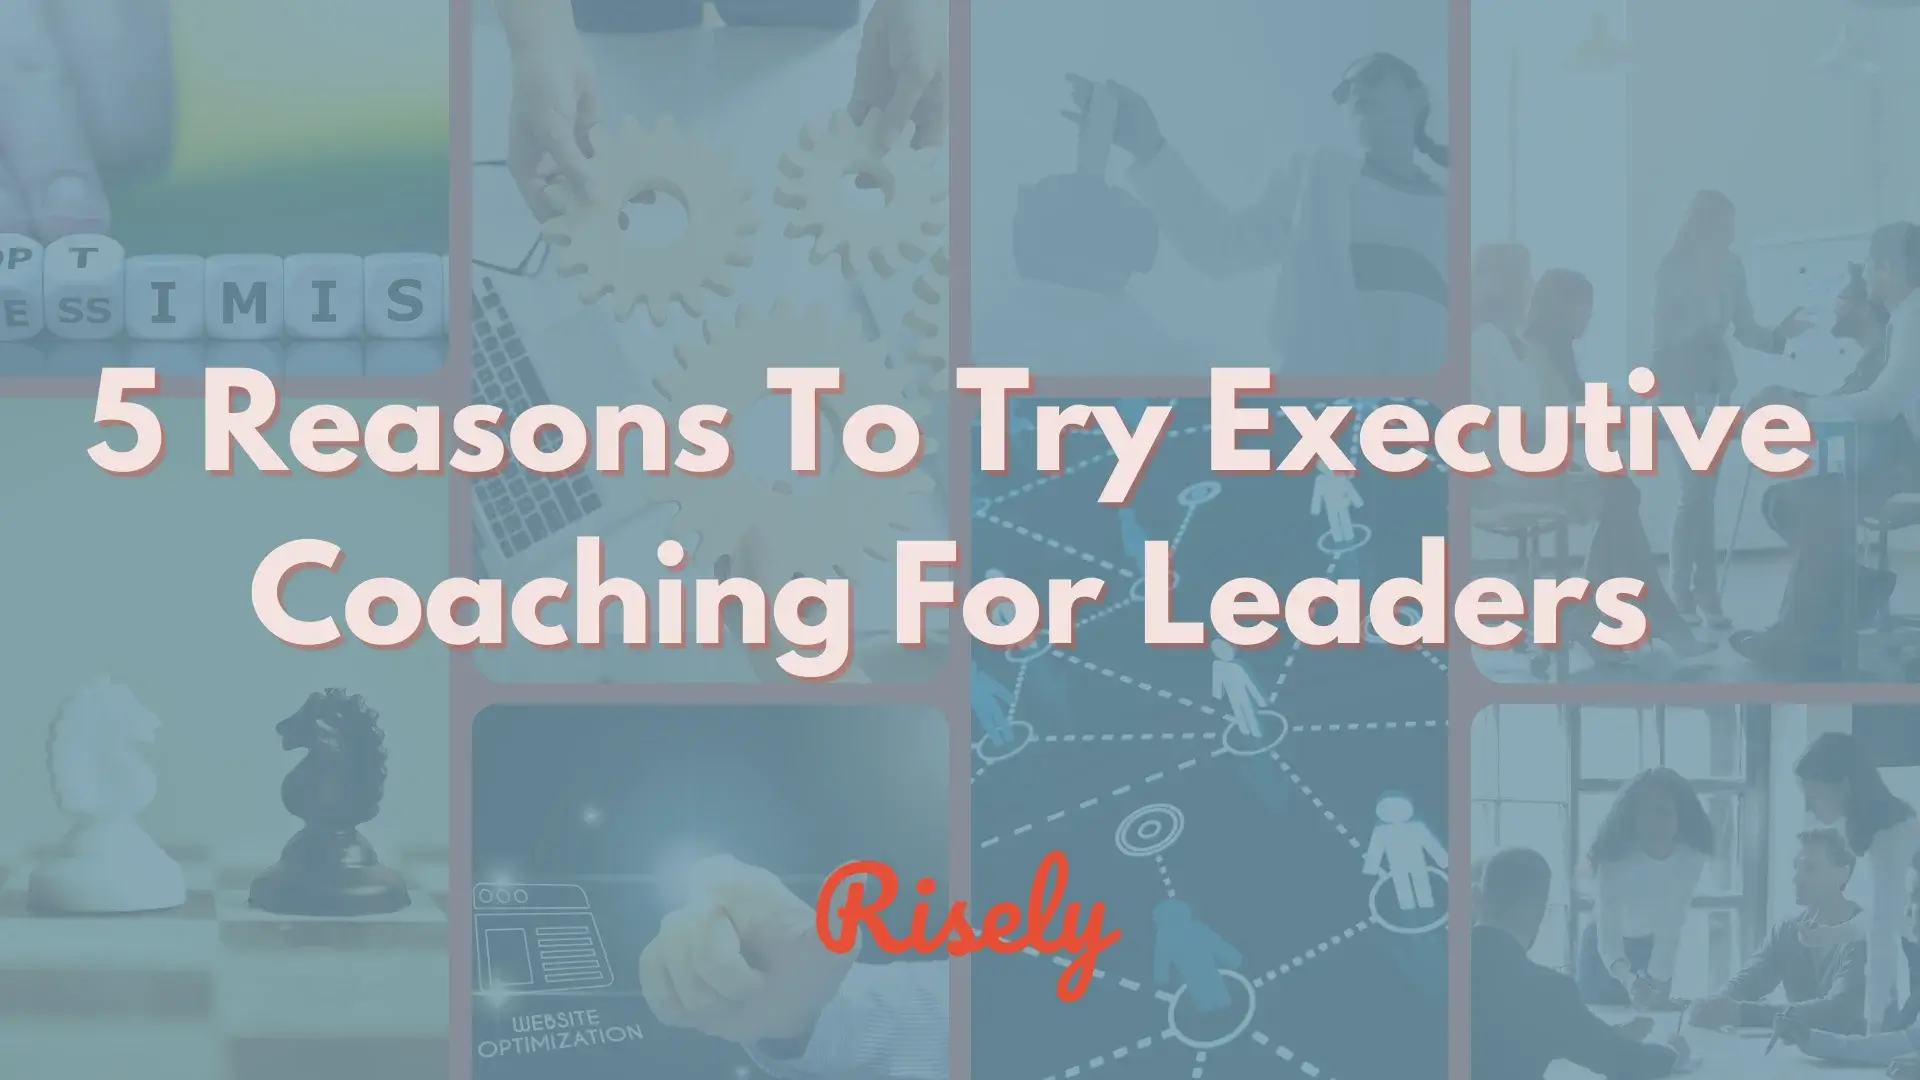 5 Reasons To Try Executive Coaching For Leaders